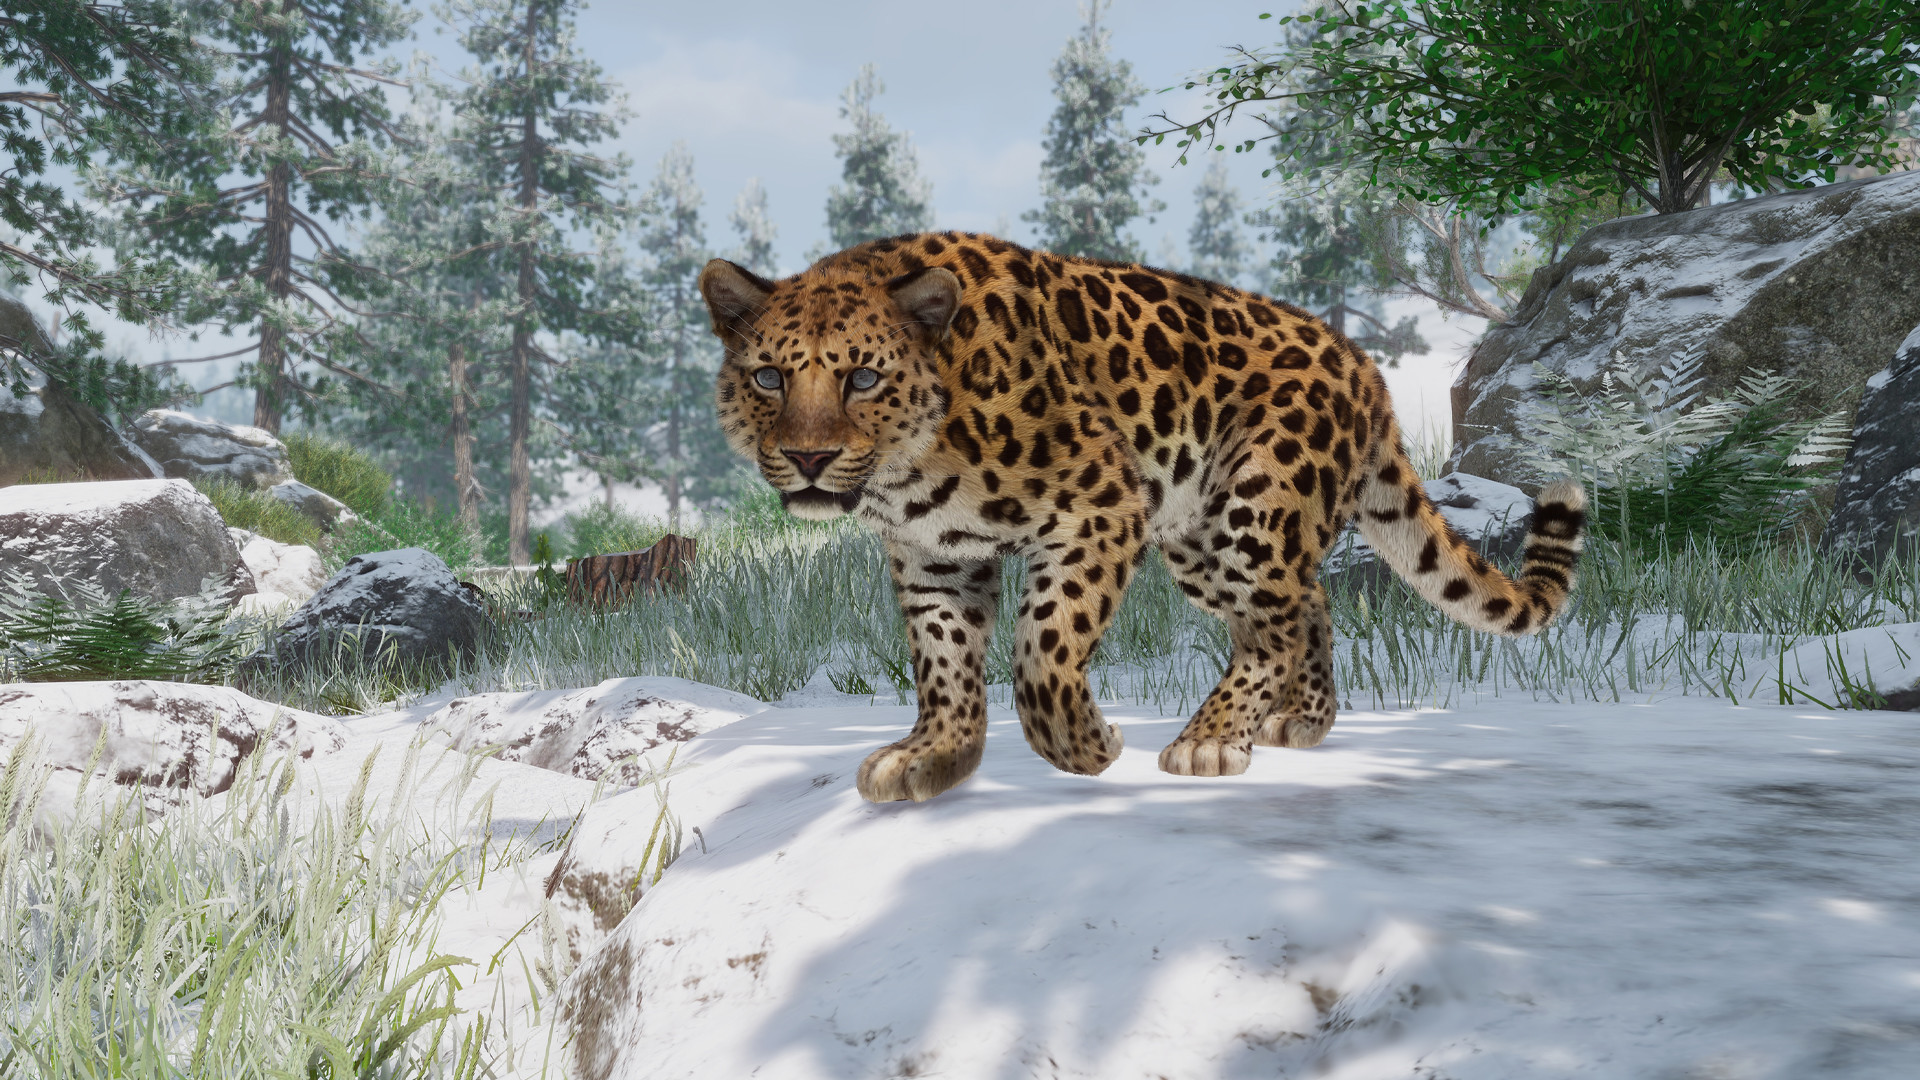 Planet Zoo gets axolotls, leopards, and more in new Conservation Pack DLC -  Niche Gamer